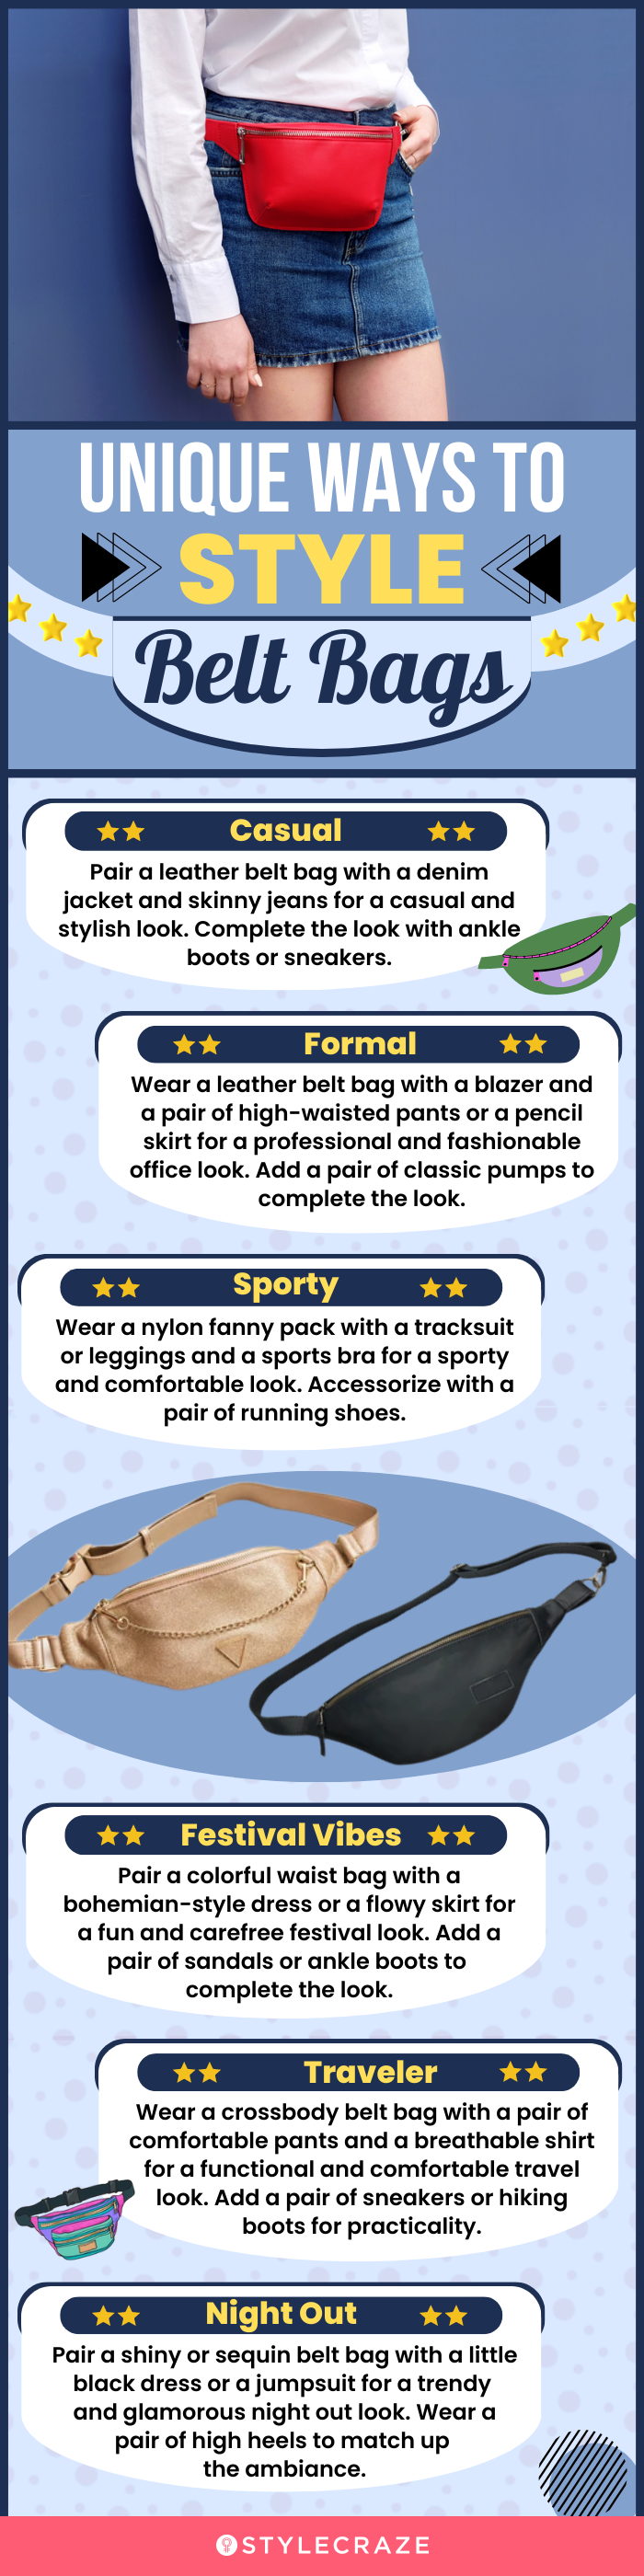 Unique Ways To Style Belt Bags (infographic)